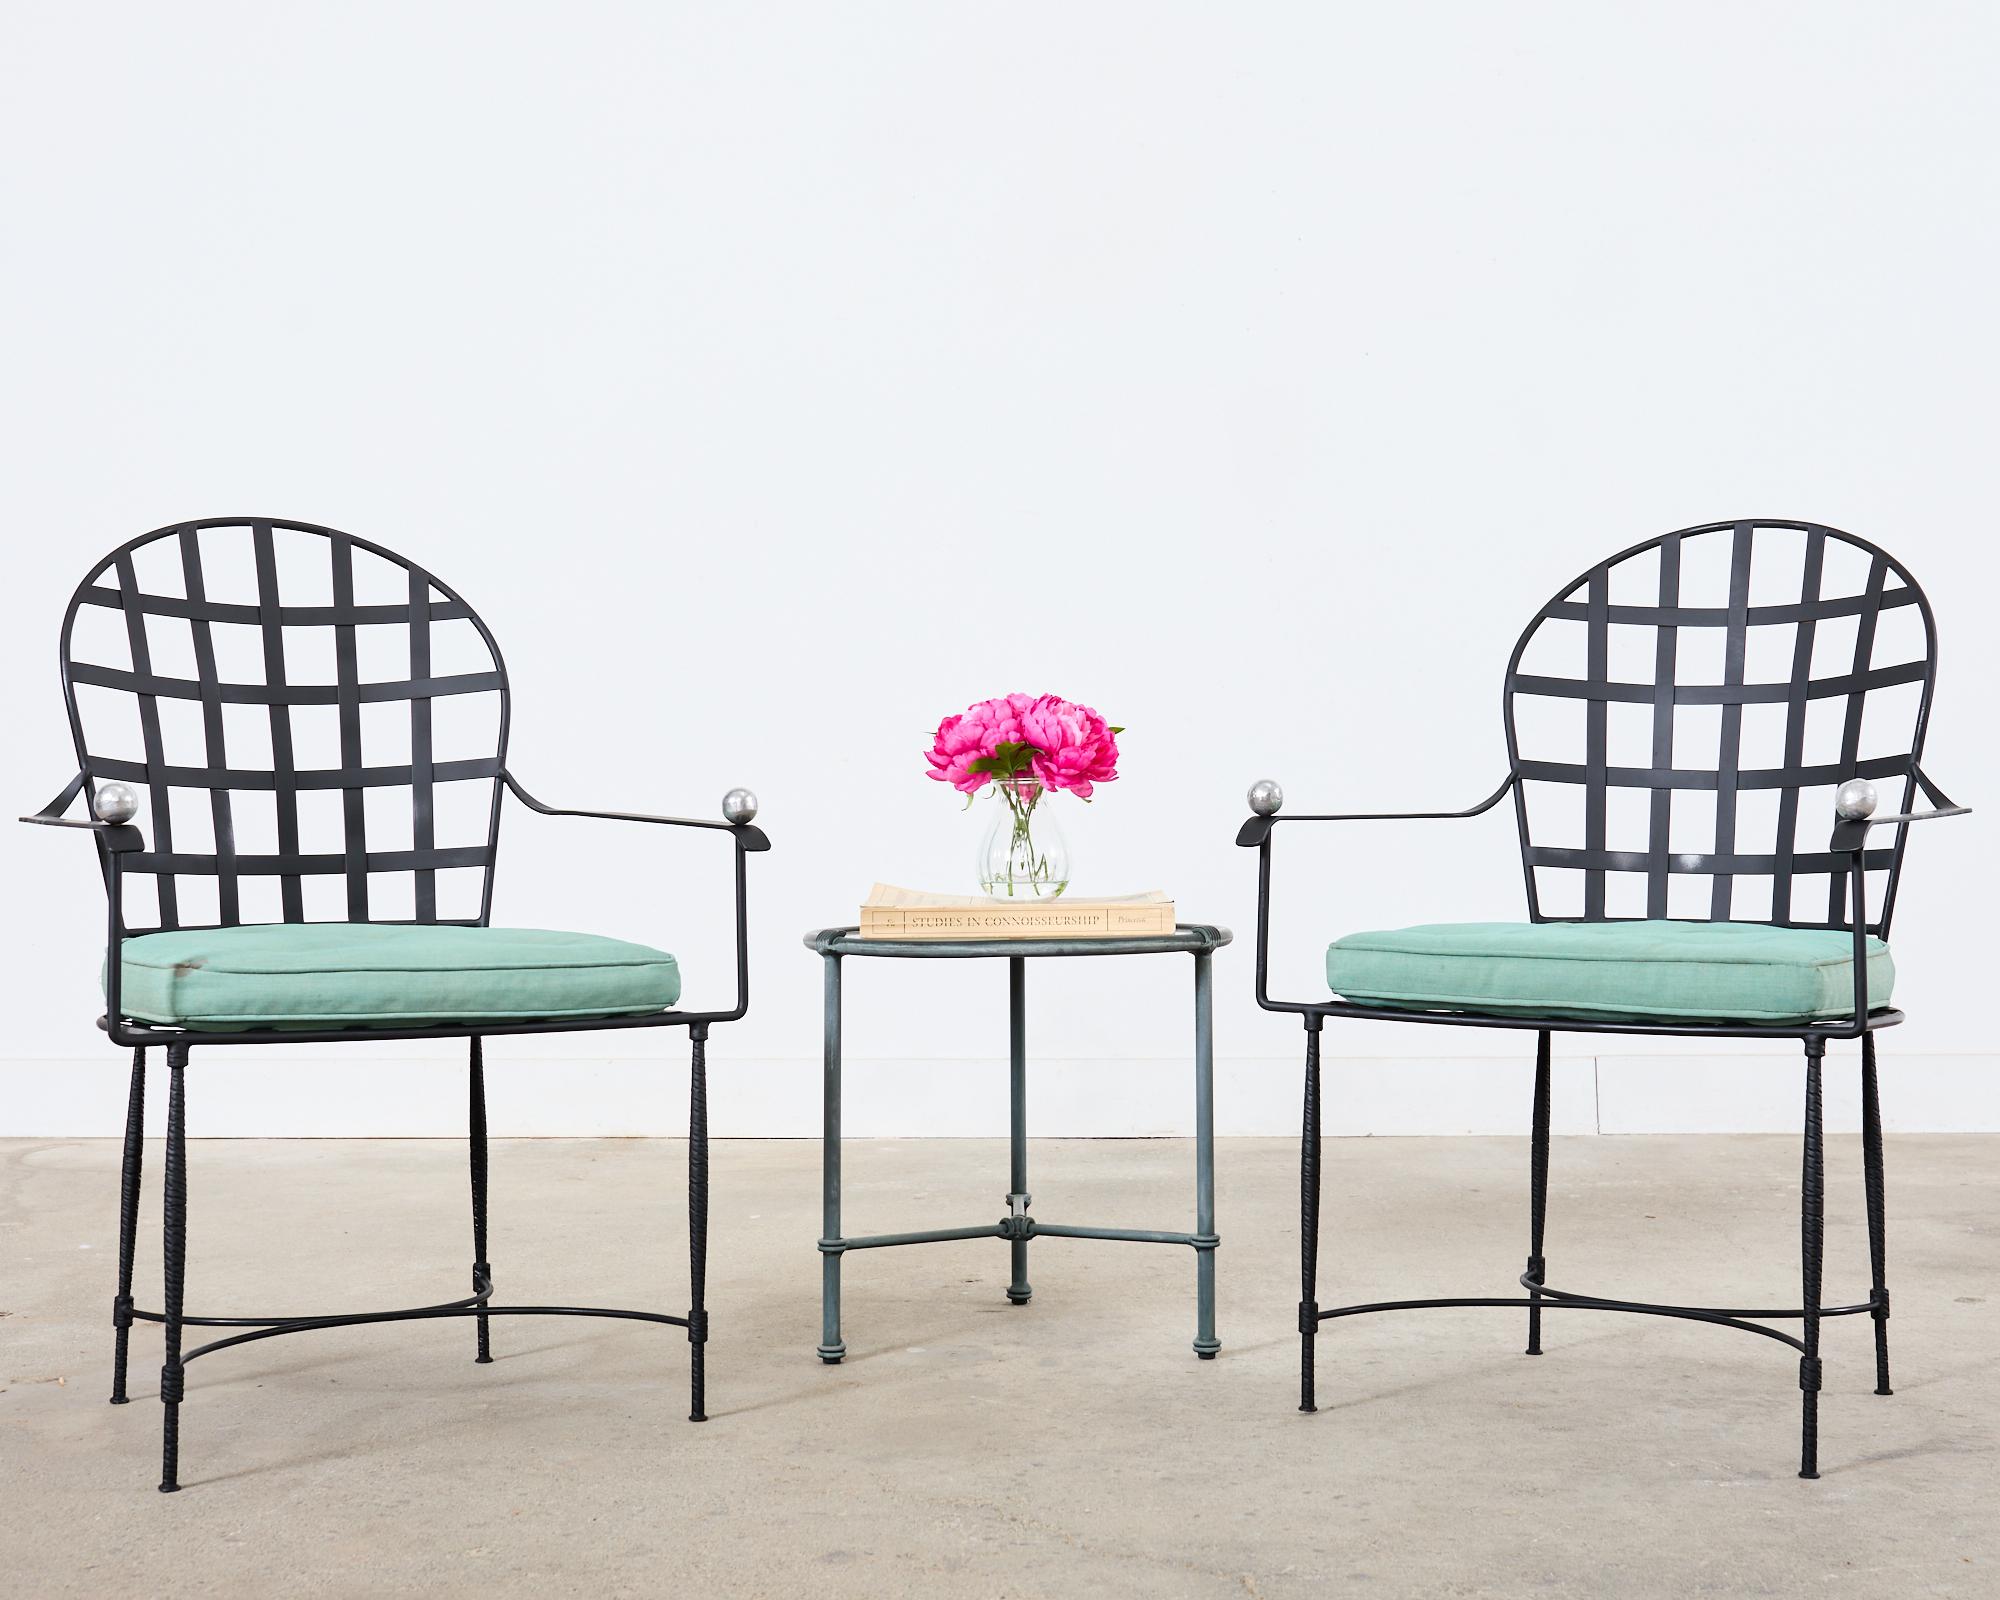 Iconic pair of iron patio and garden dining armchairs made in the manner and style of Mario Papperzini for John Salterini. The inspiration for the Janus et Cie round back Amalfi chair with its neoclassical style lattice inset seat and back. The